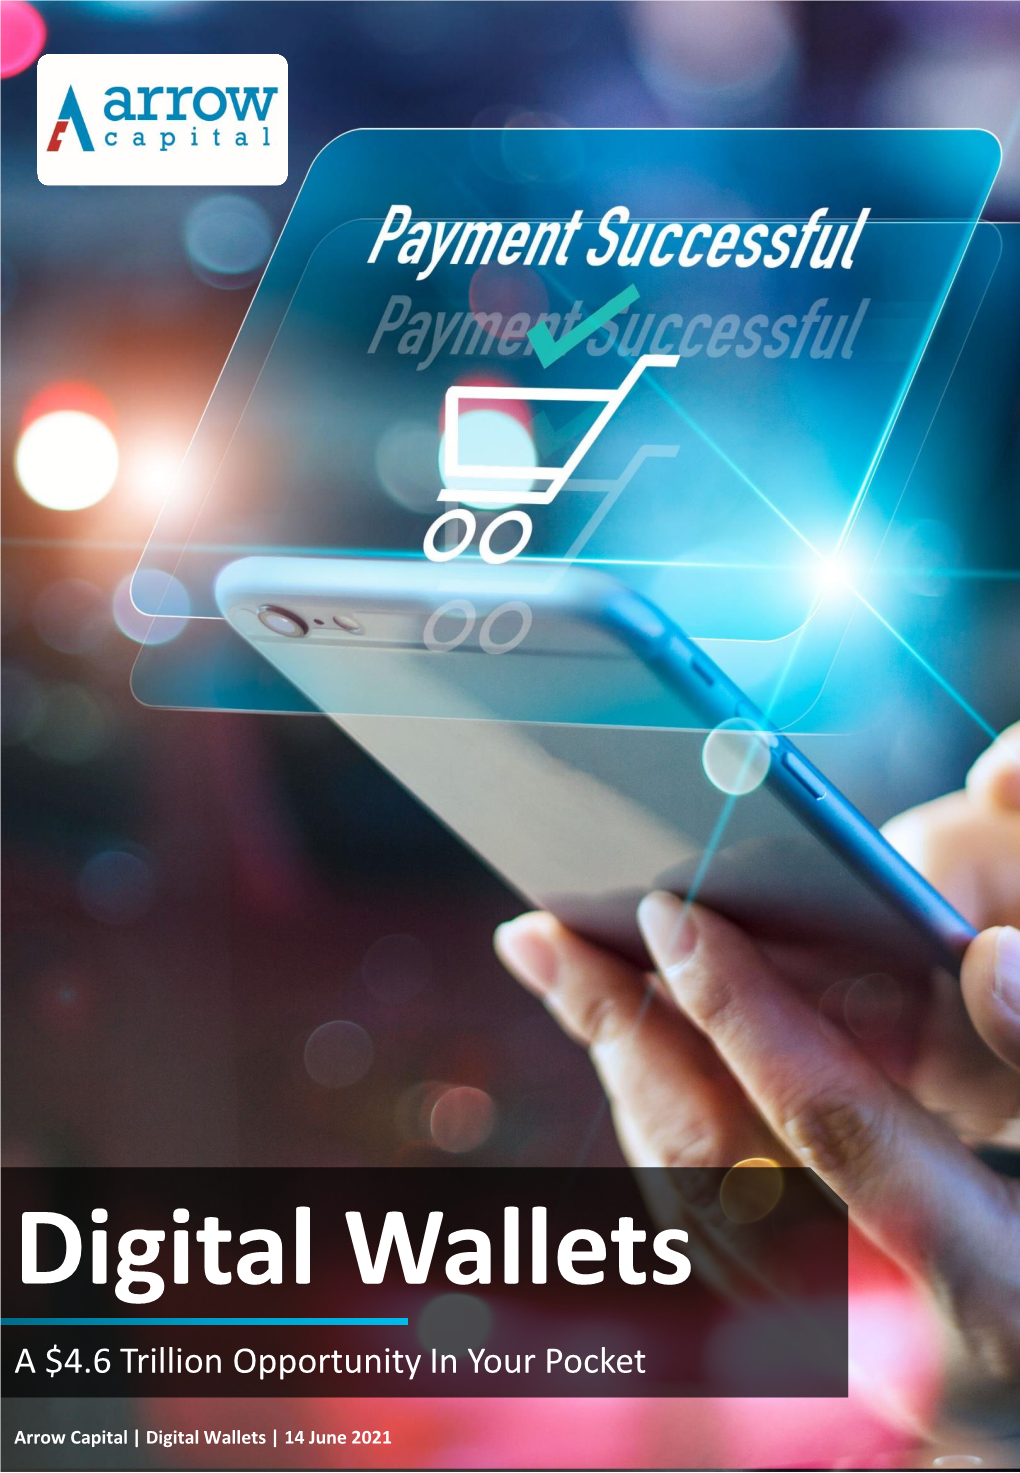 Digital Wallets a $4.6 Trillion Opportunity in Your Pocket